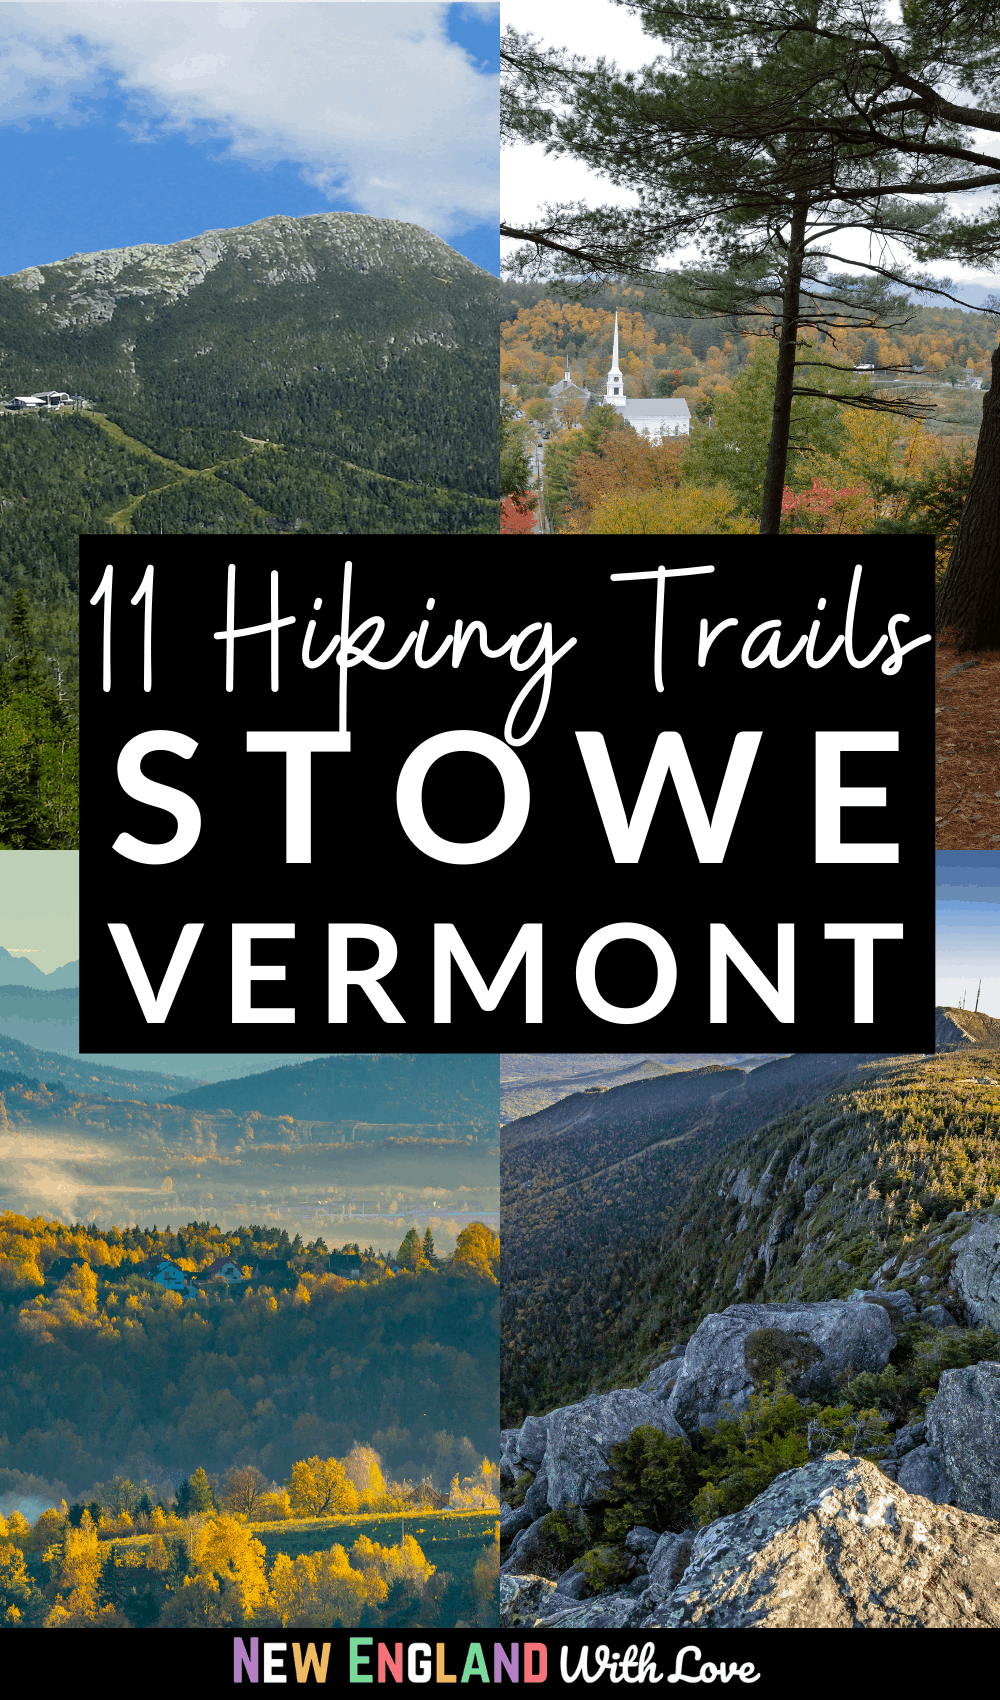 Pinterest graphic reading "11 Hiking Trails Stowe Vermont"